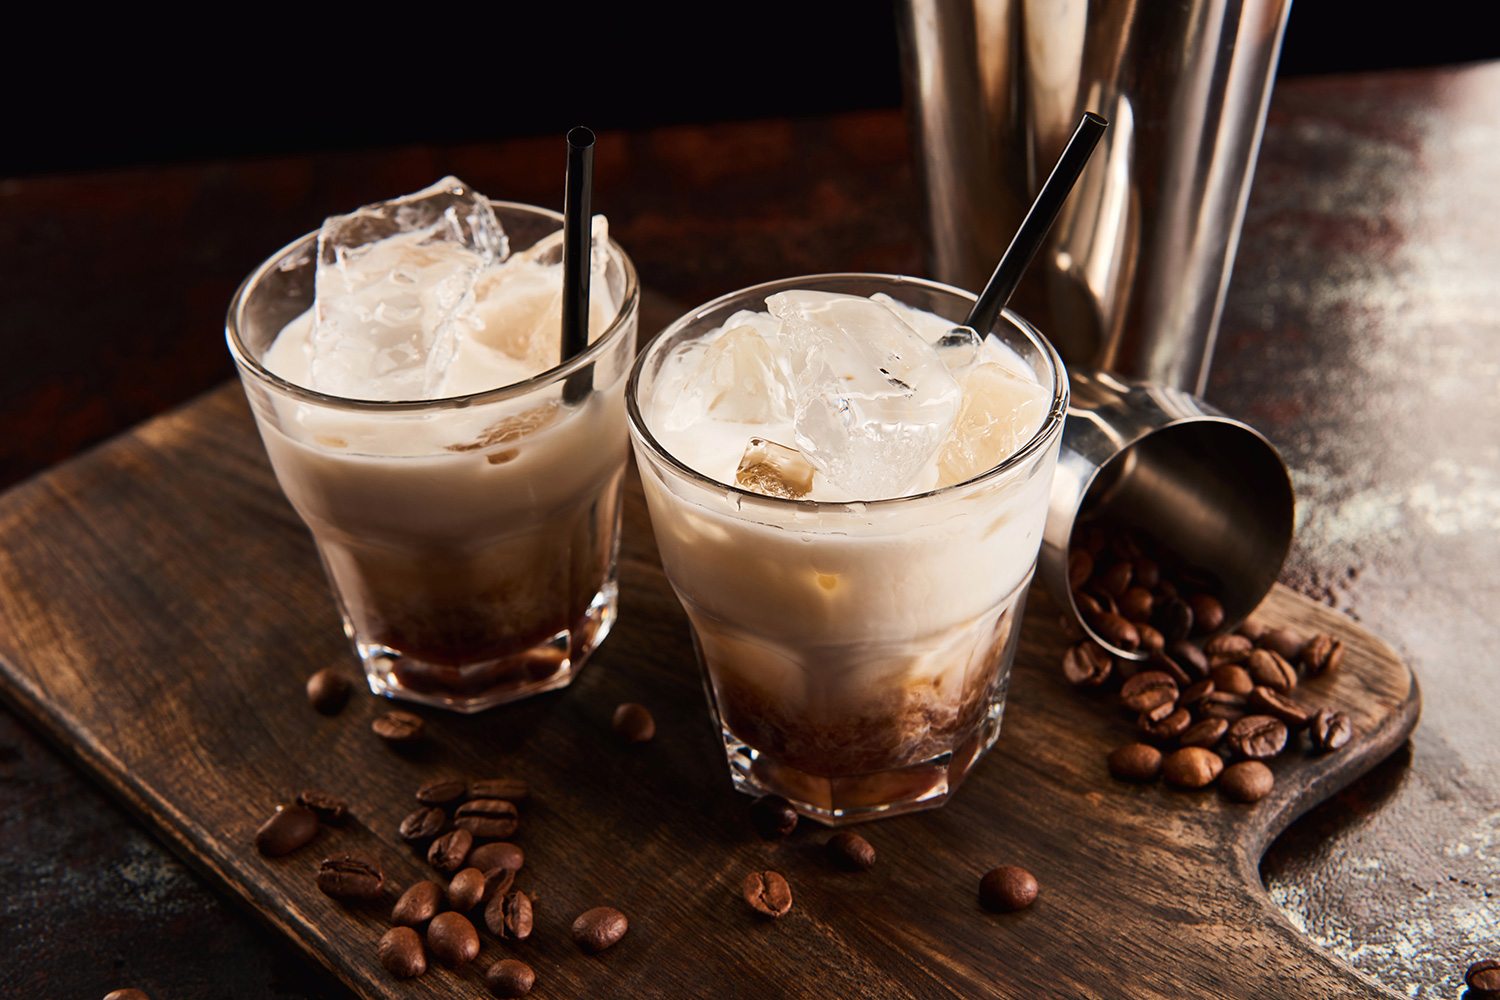 White Russian in a glass with straw